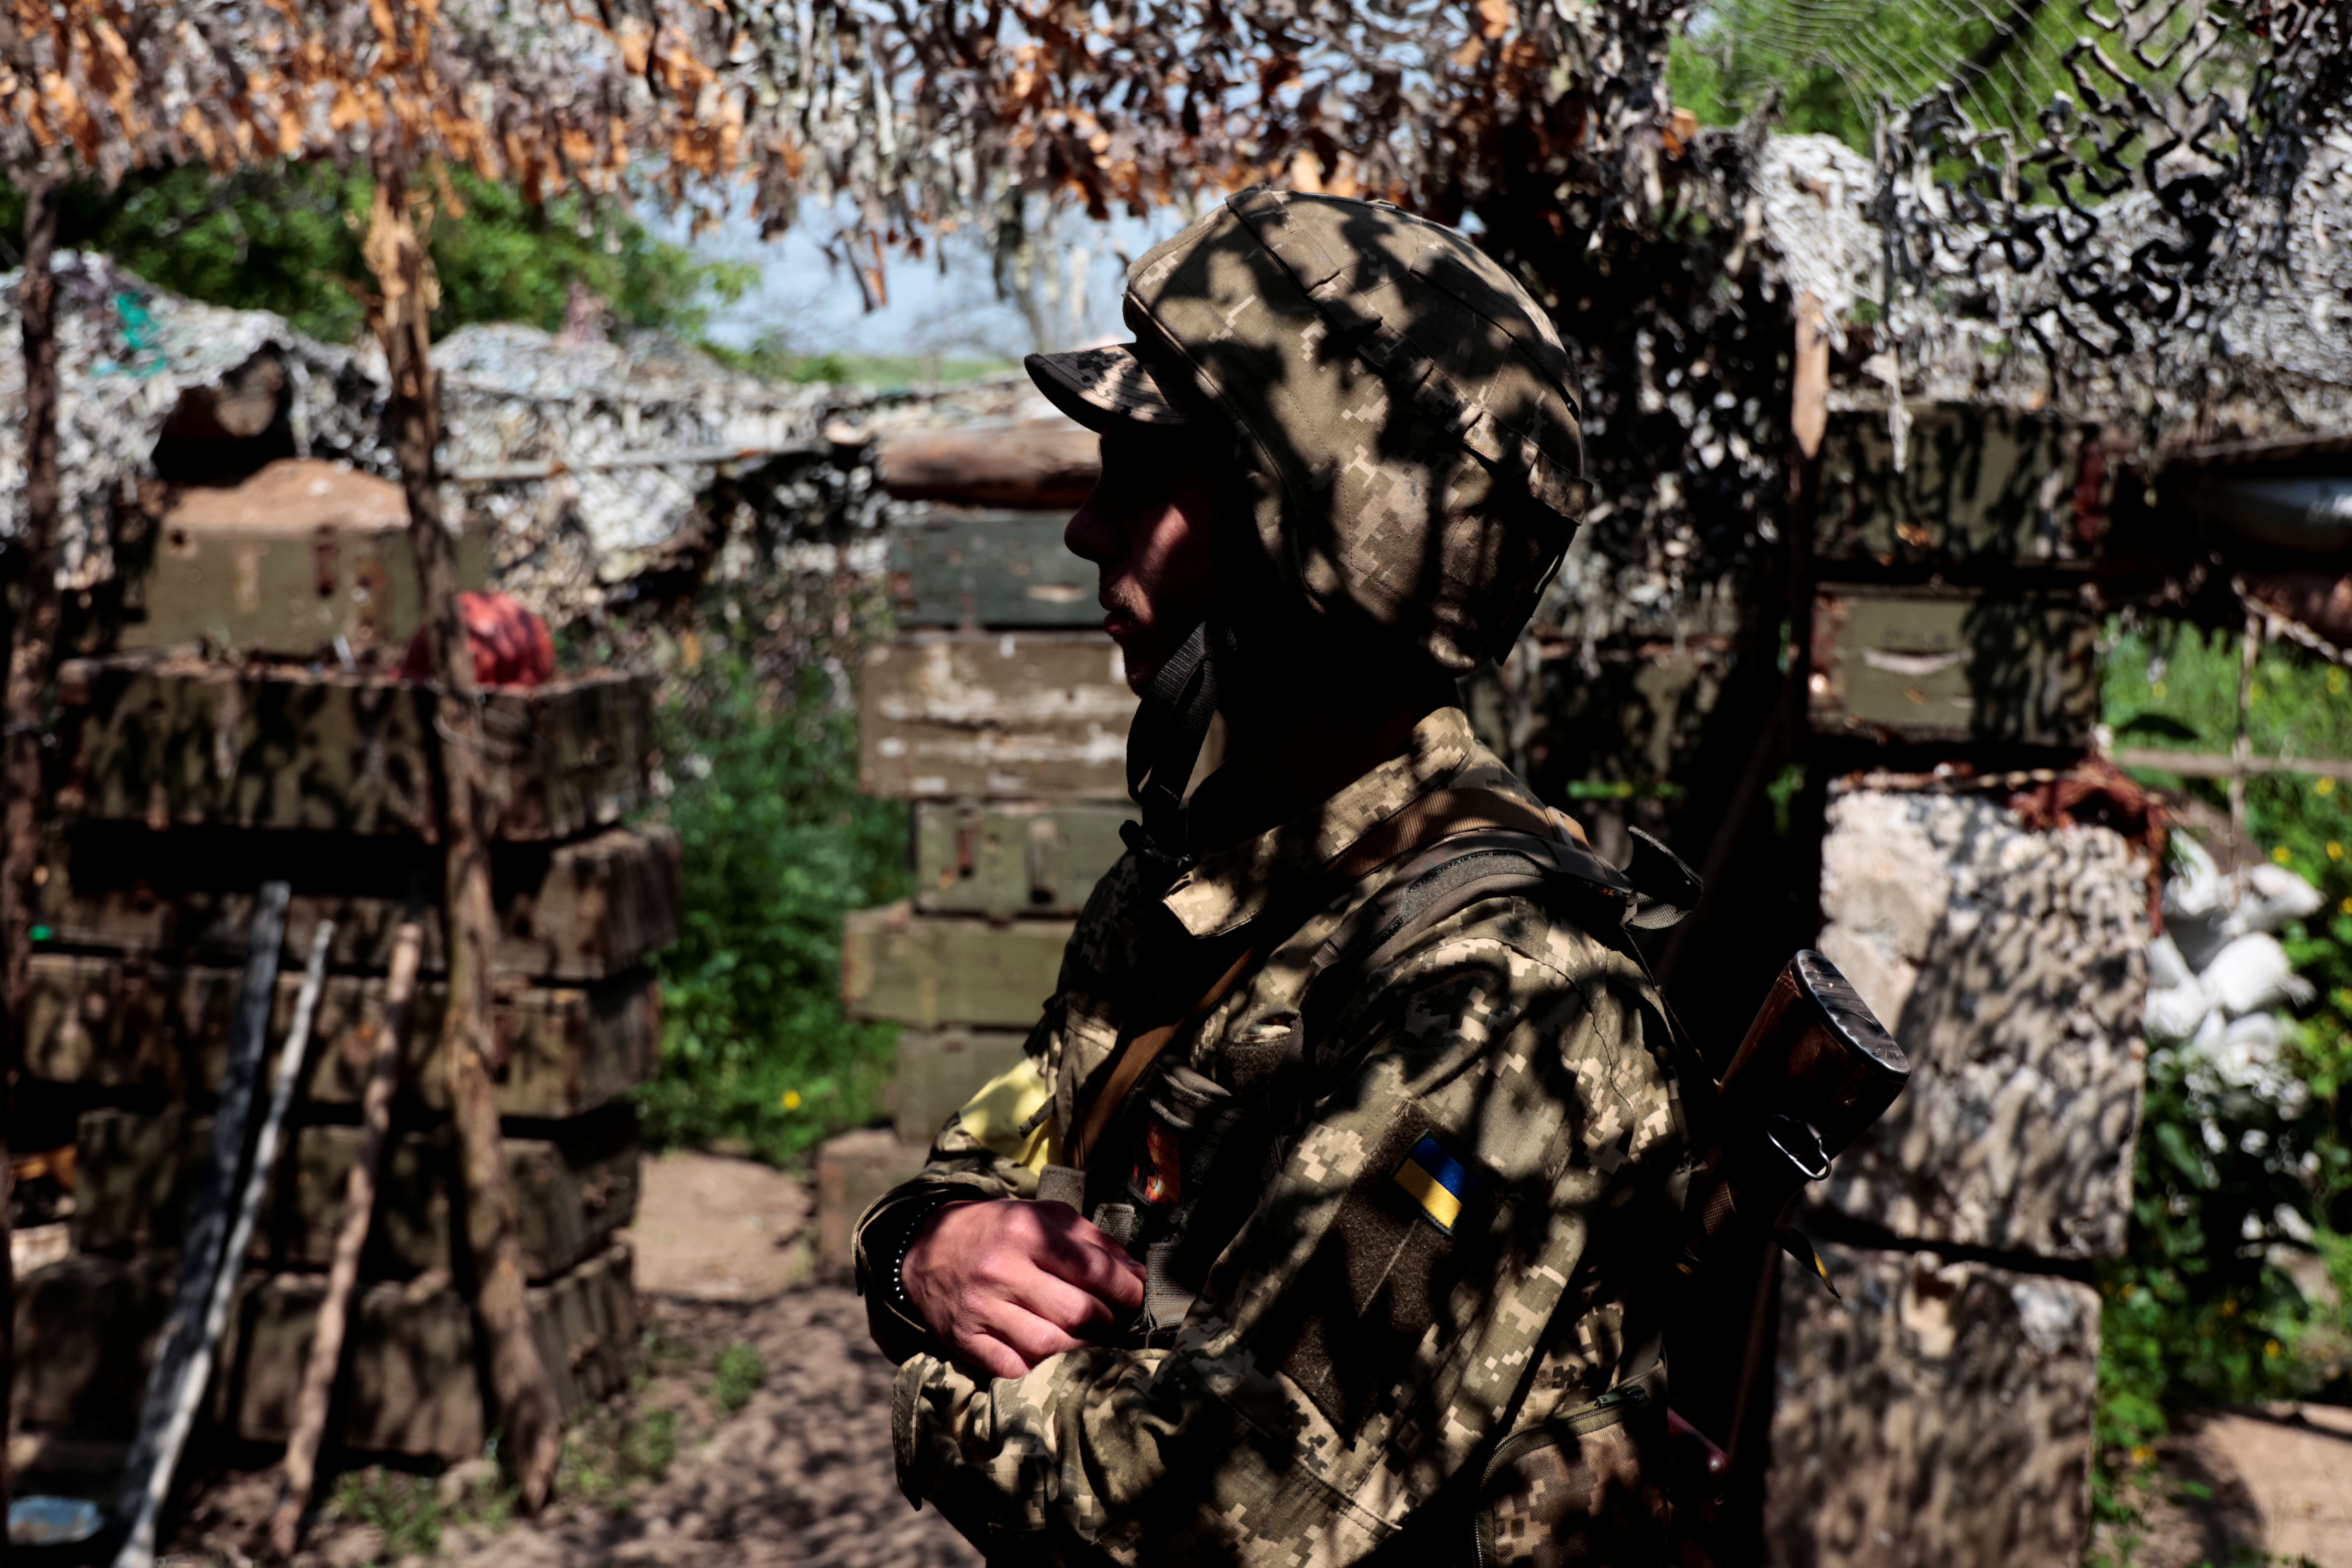 Russia's attack on Ukraine continues, in Donetsk region